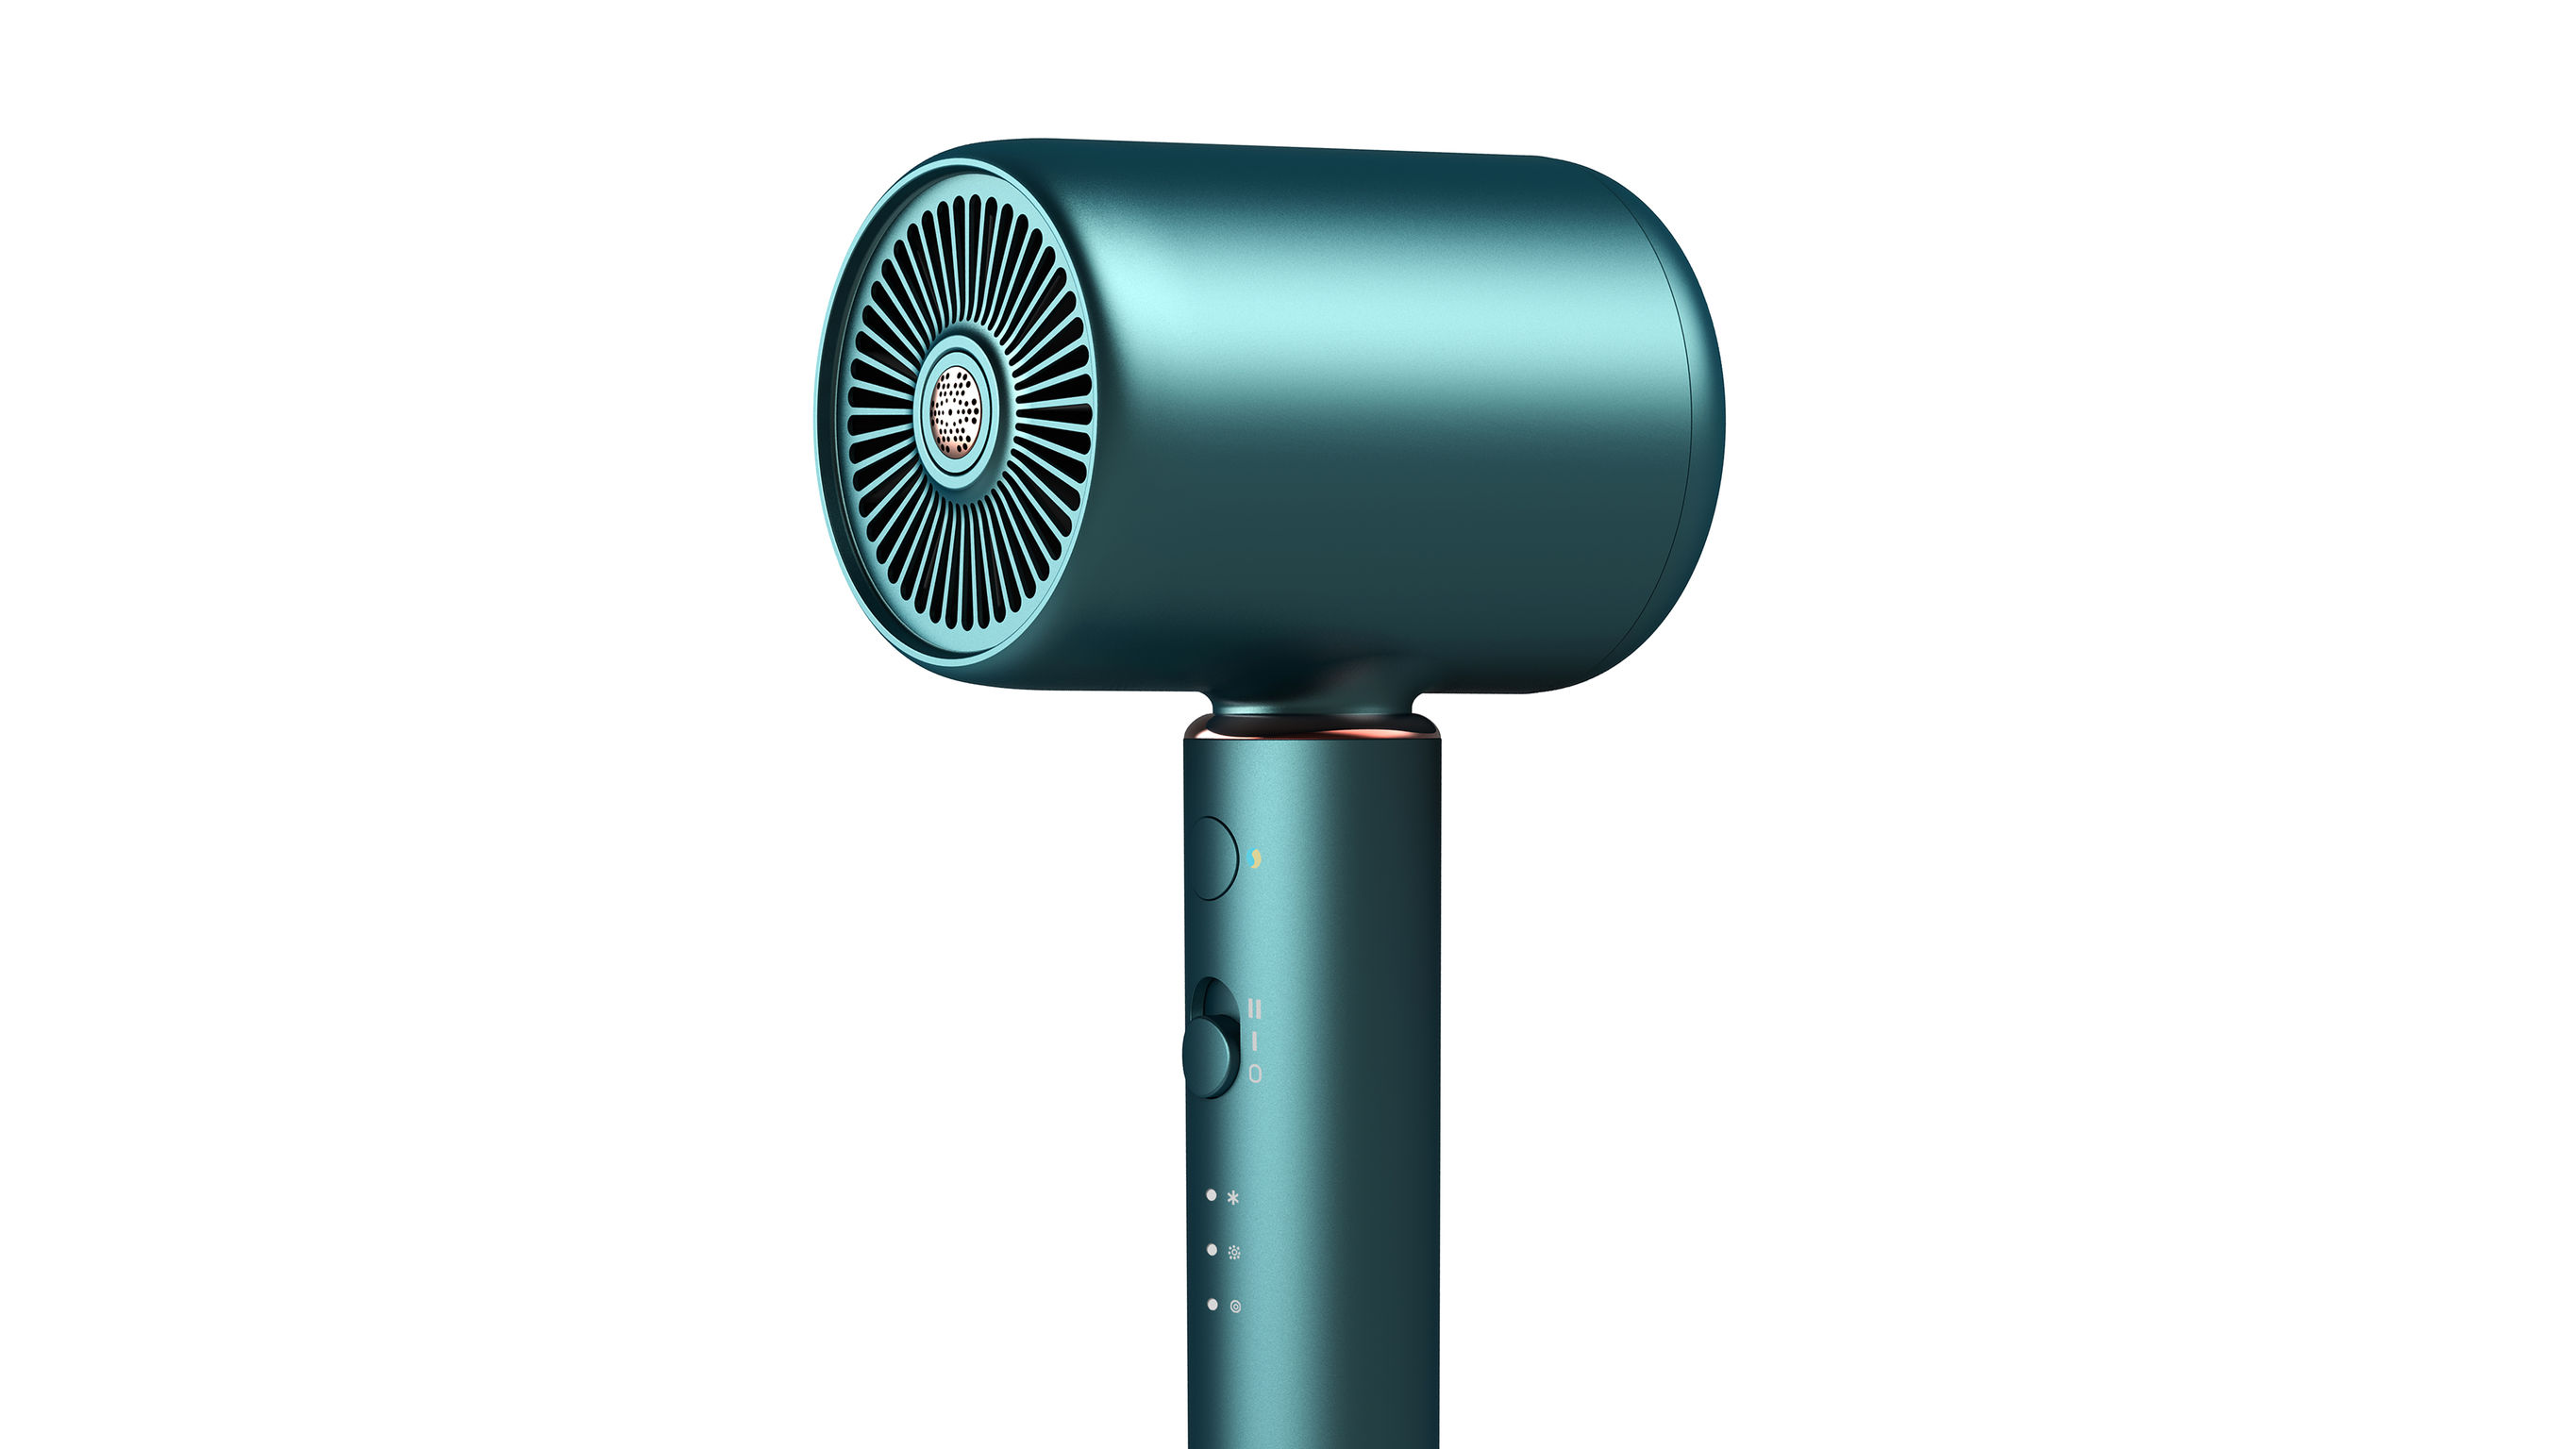 ShowSee VC Hair Dryer